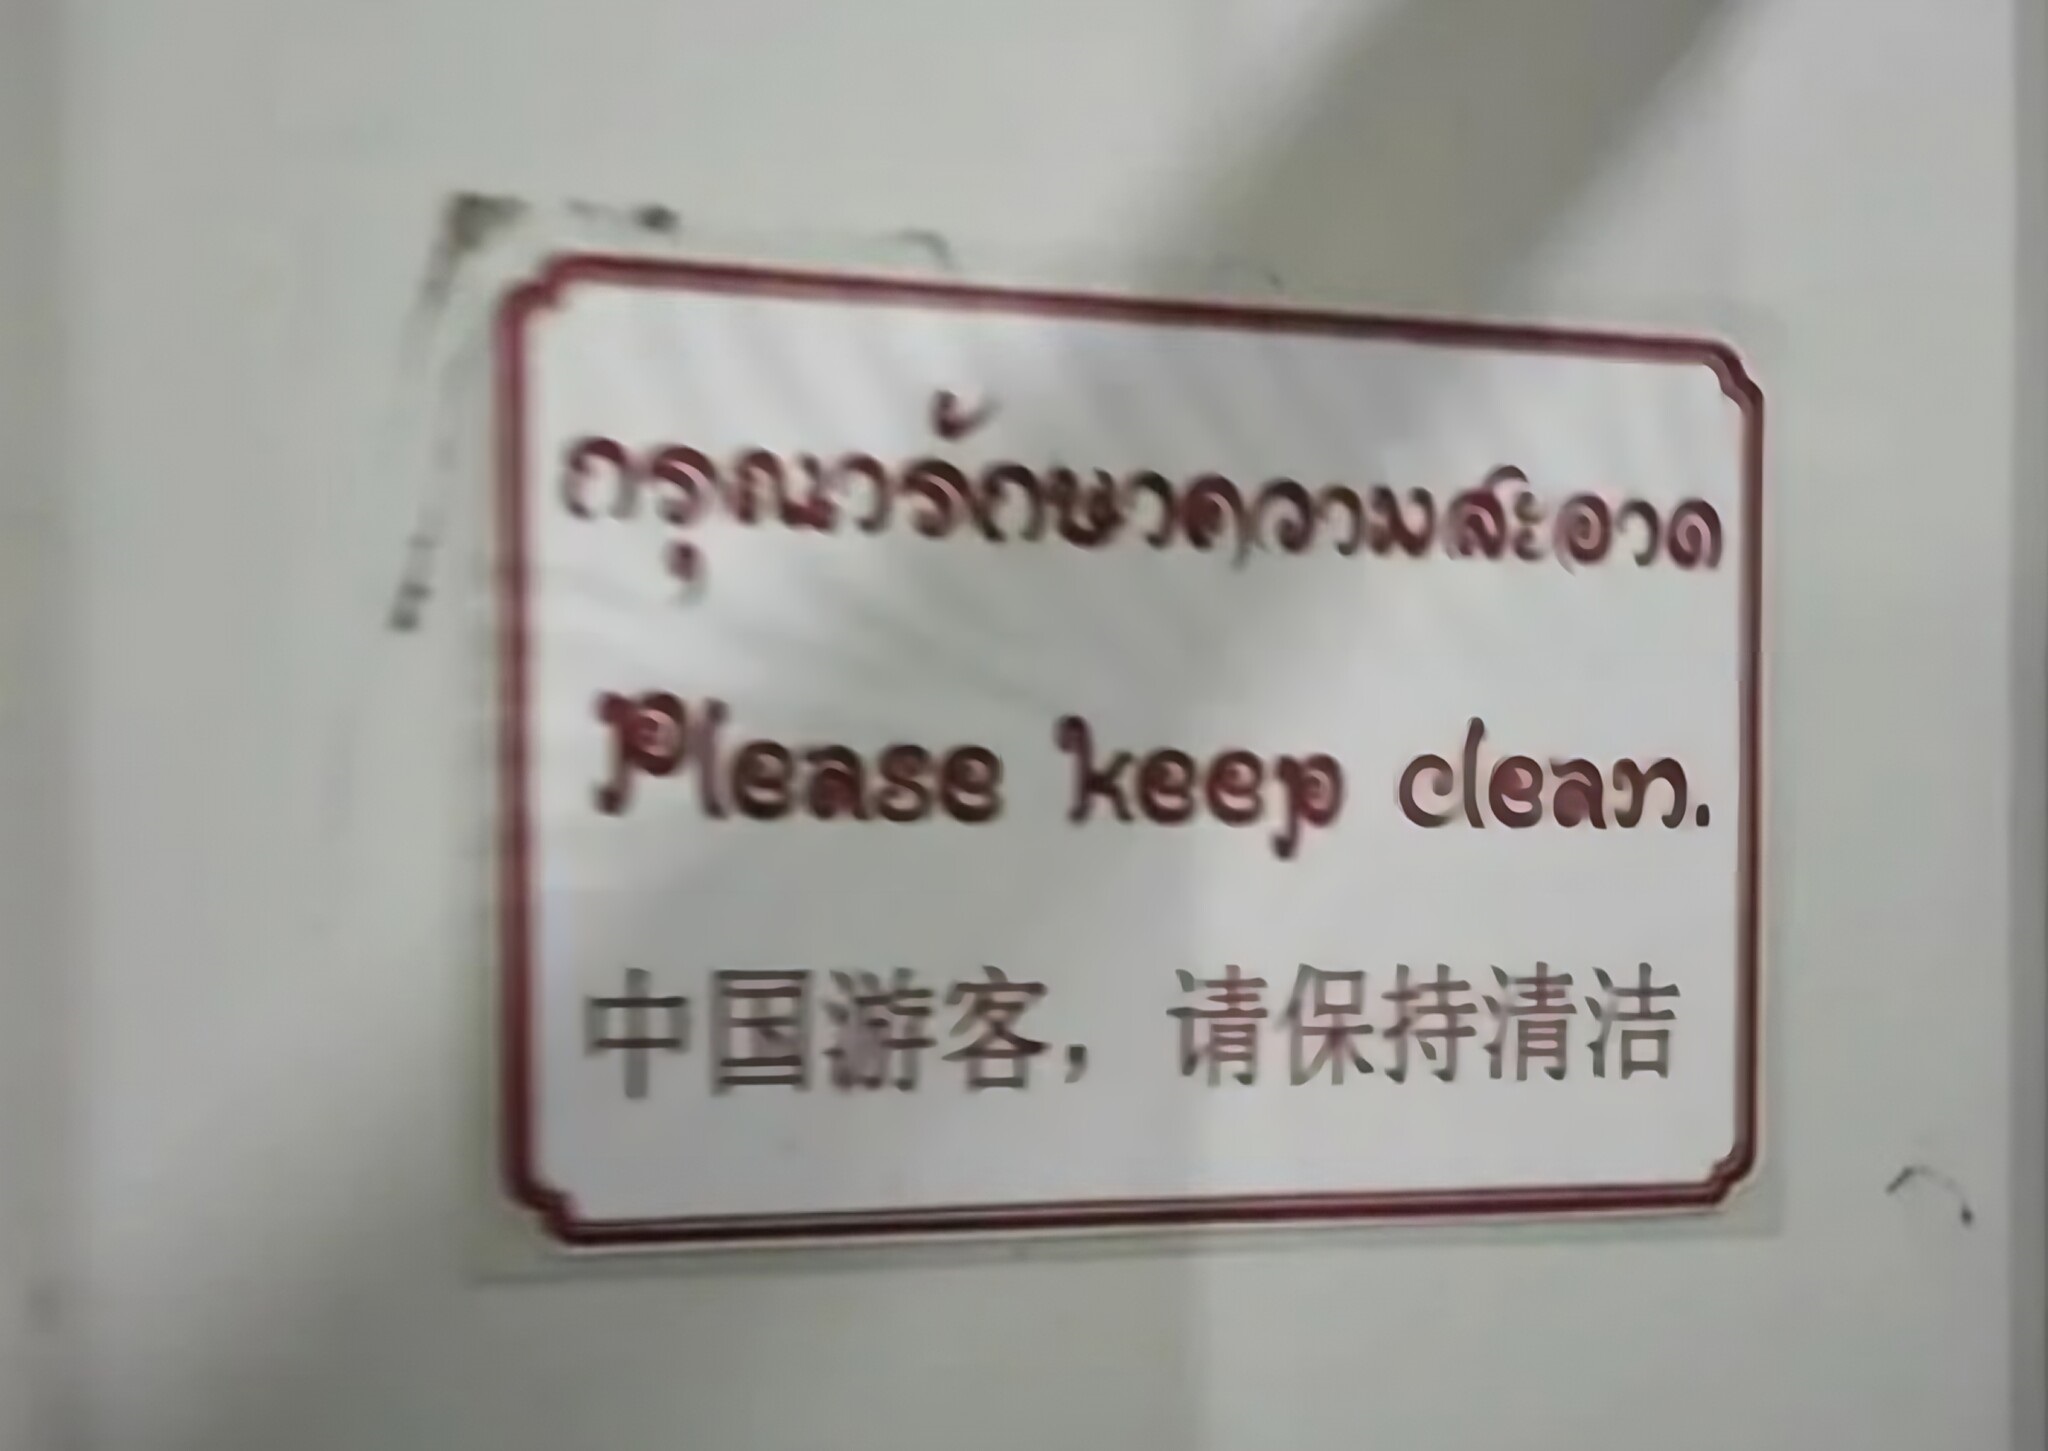 Thai temple toilet sign offended Chinese people